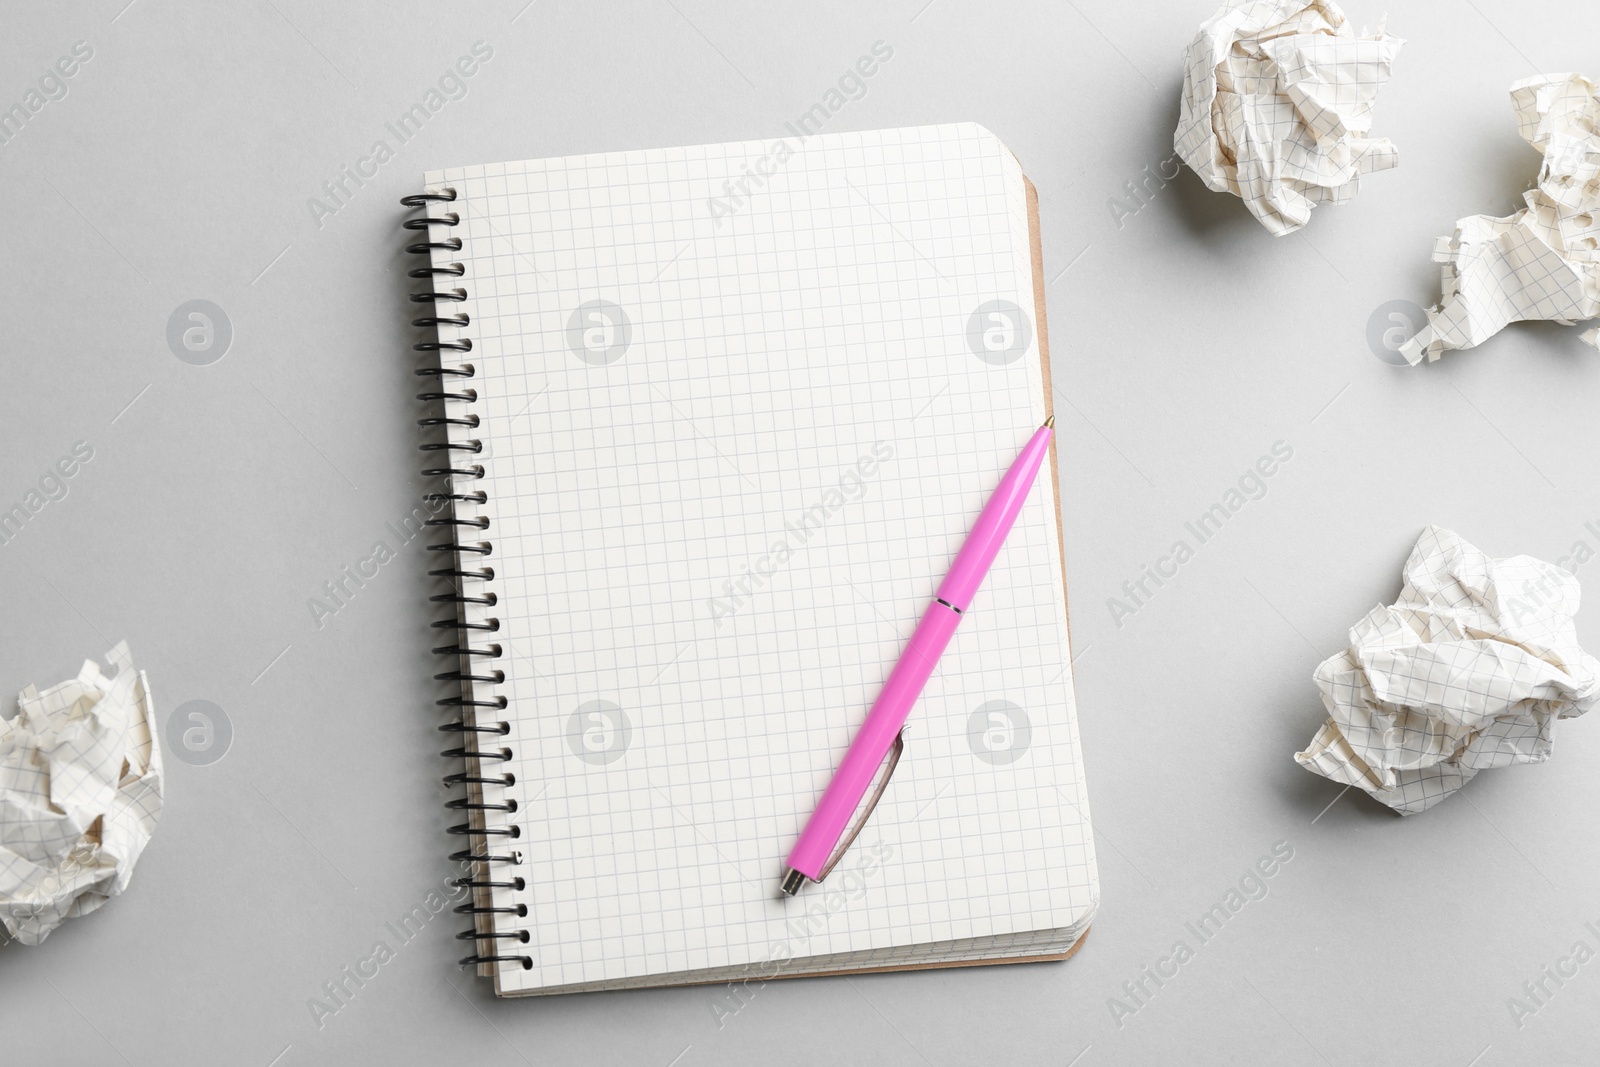 Photo of Notebook, pen and crumpled sheets of paper on light background, flat lay. Space for text